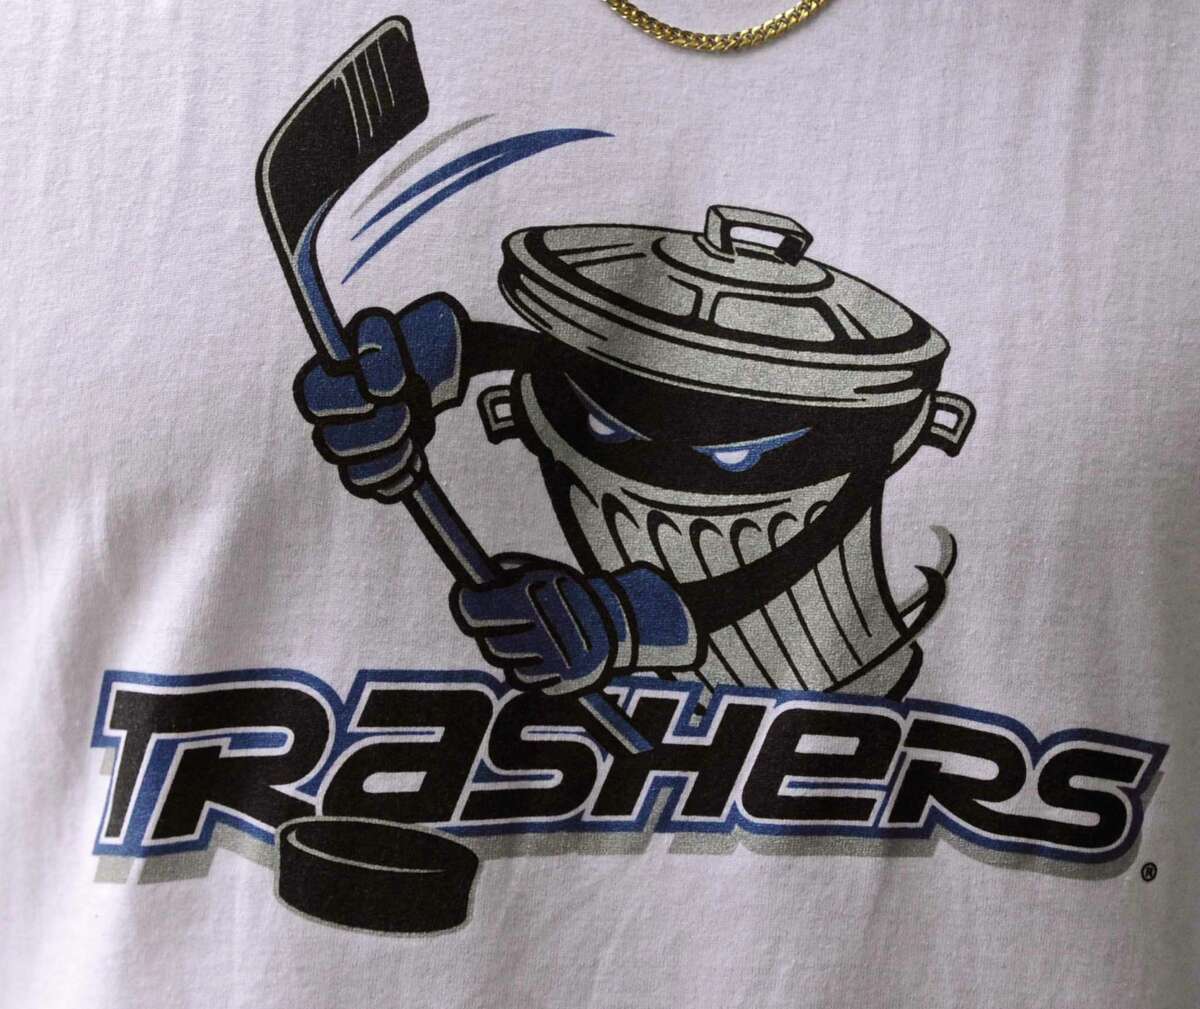 The Danbury Trashers logo on a jersey worn by A.J. Galante. Galante’s father, James Galante, bought the minor league hockey expansion team years ago.